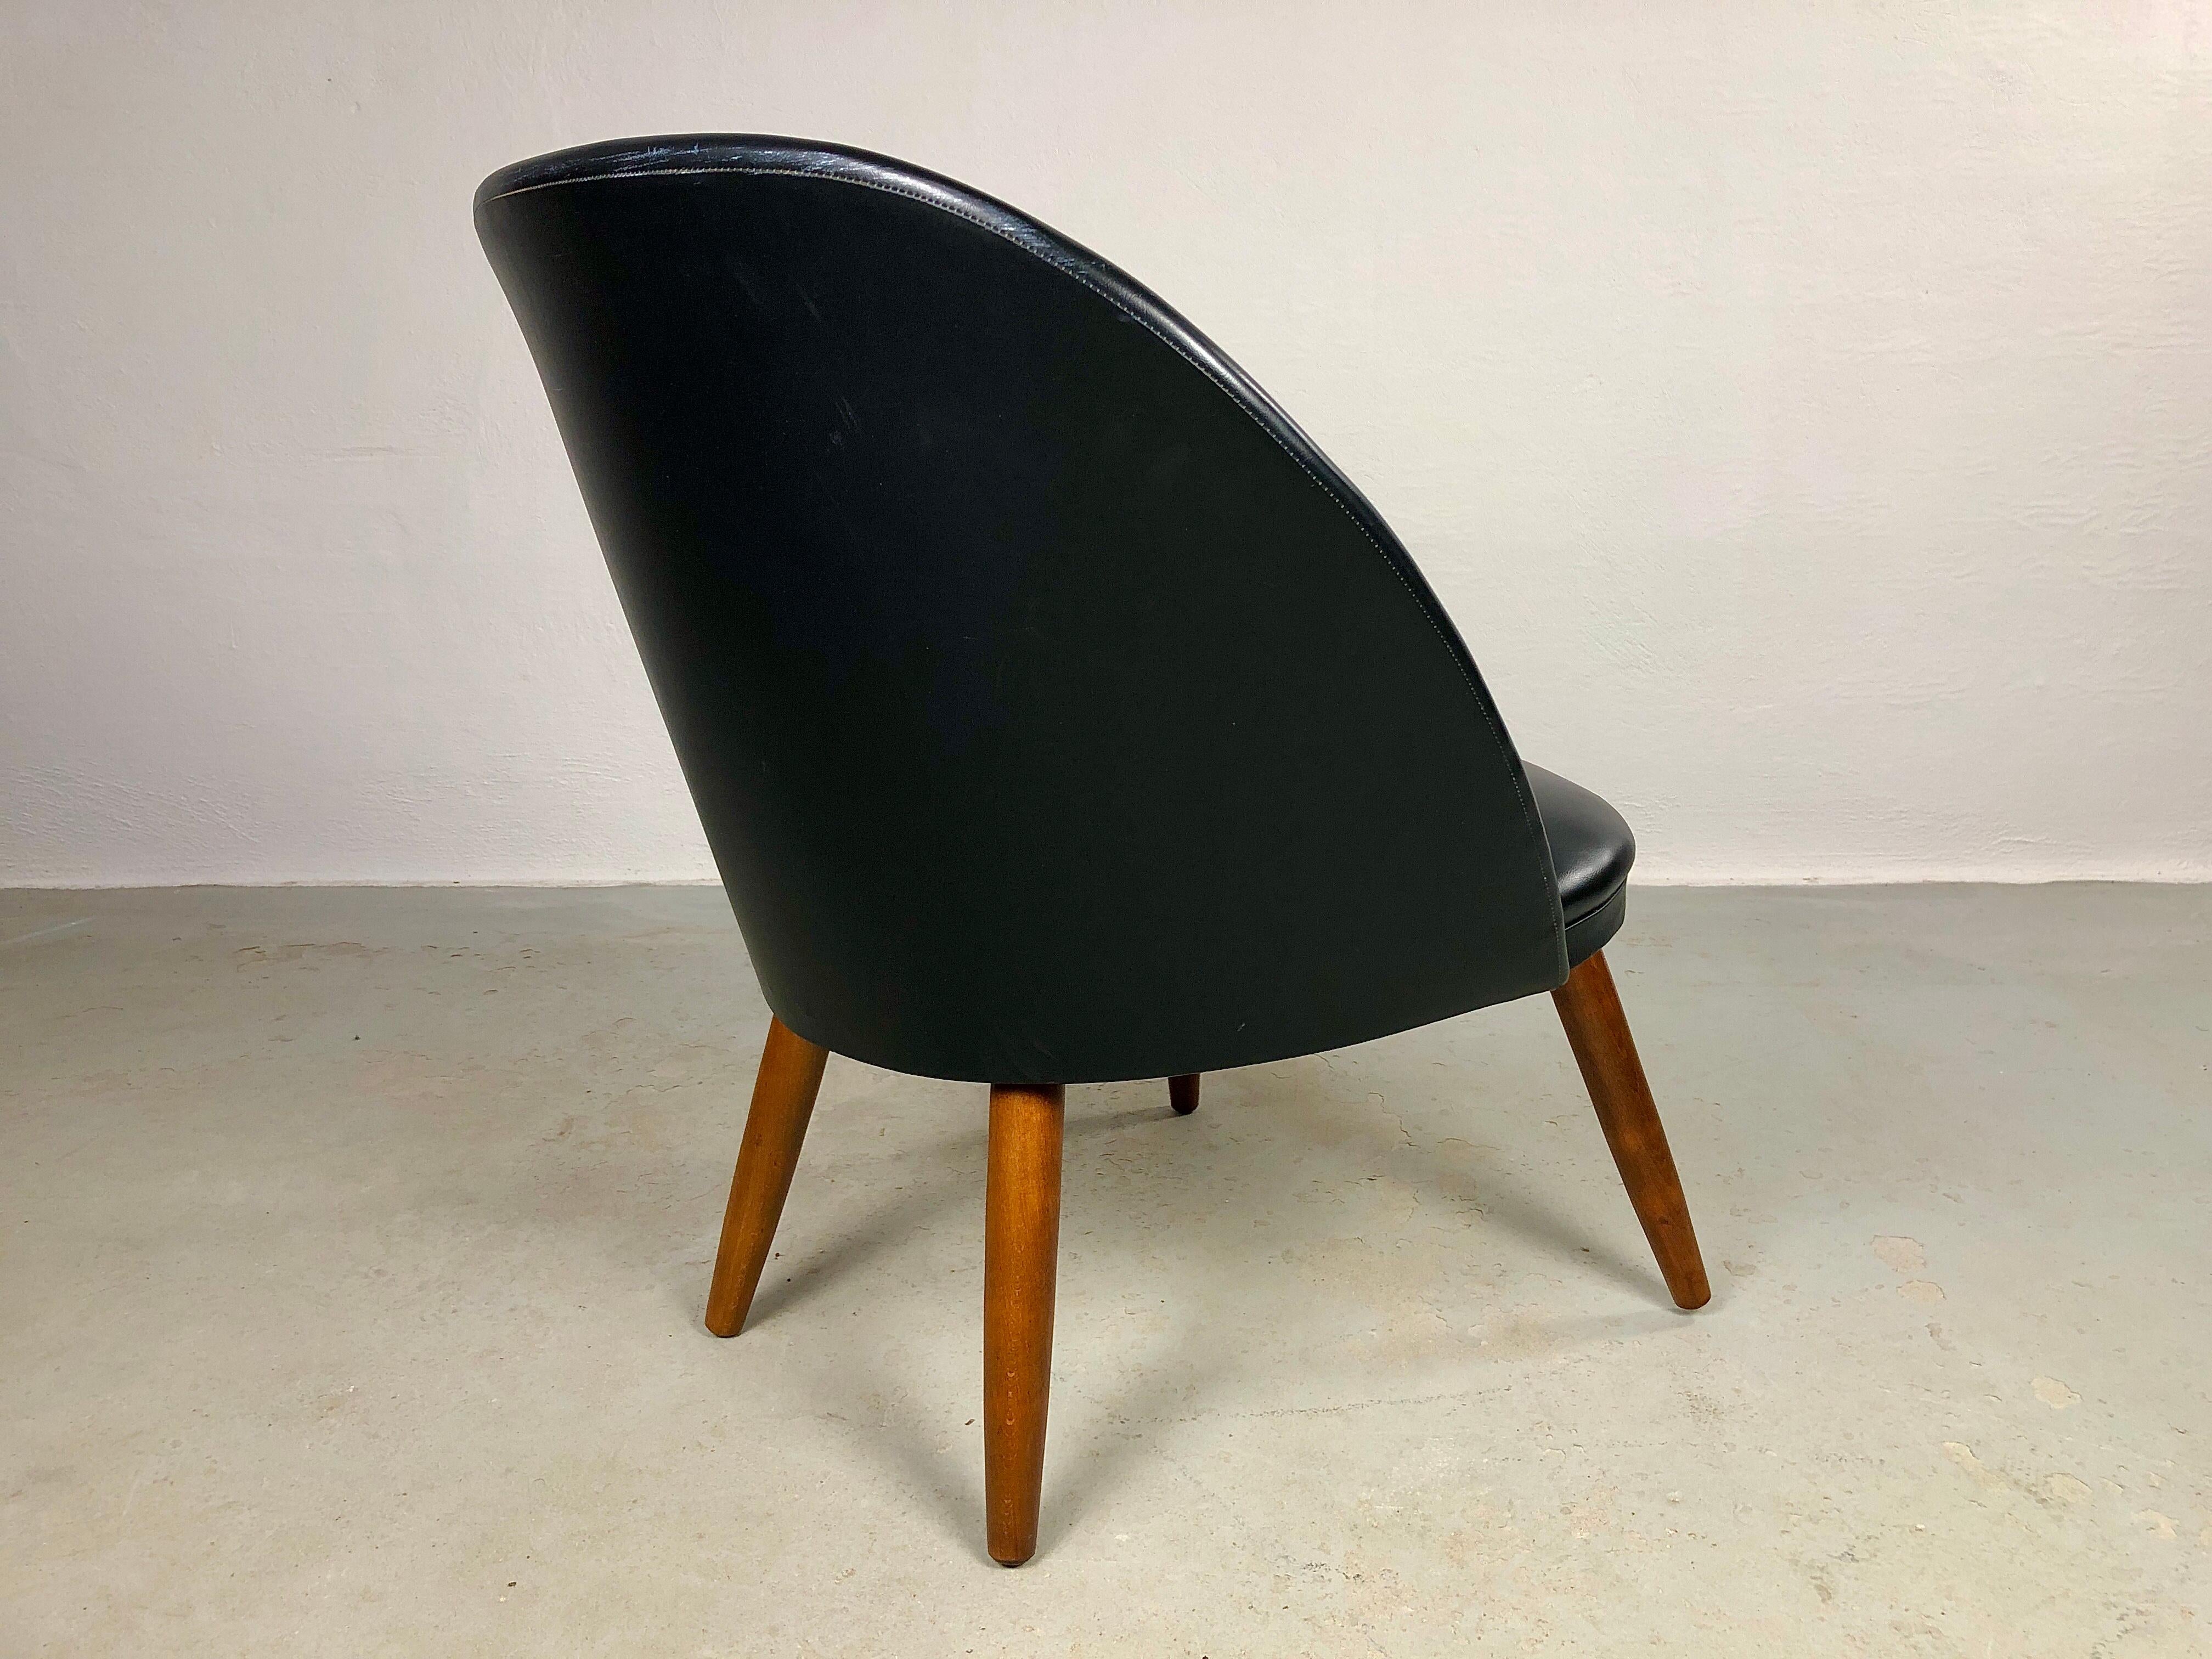 1960's Fully Restored Danish Lounge Chair Reupholstered in Black Leather For Sale 2